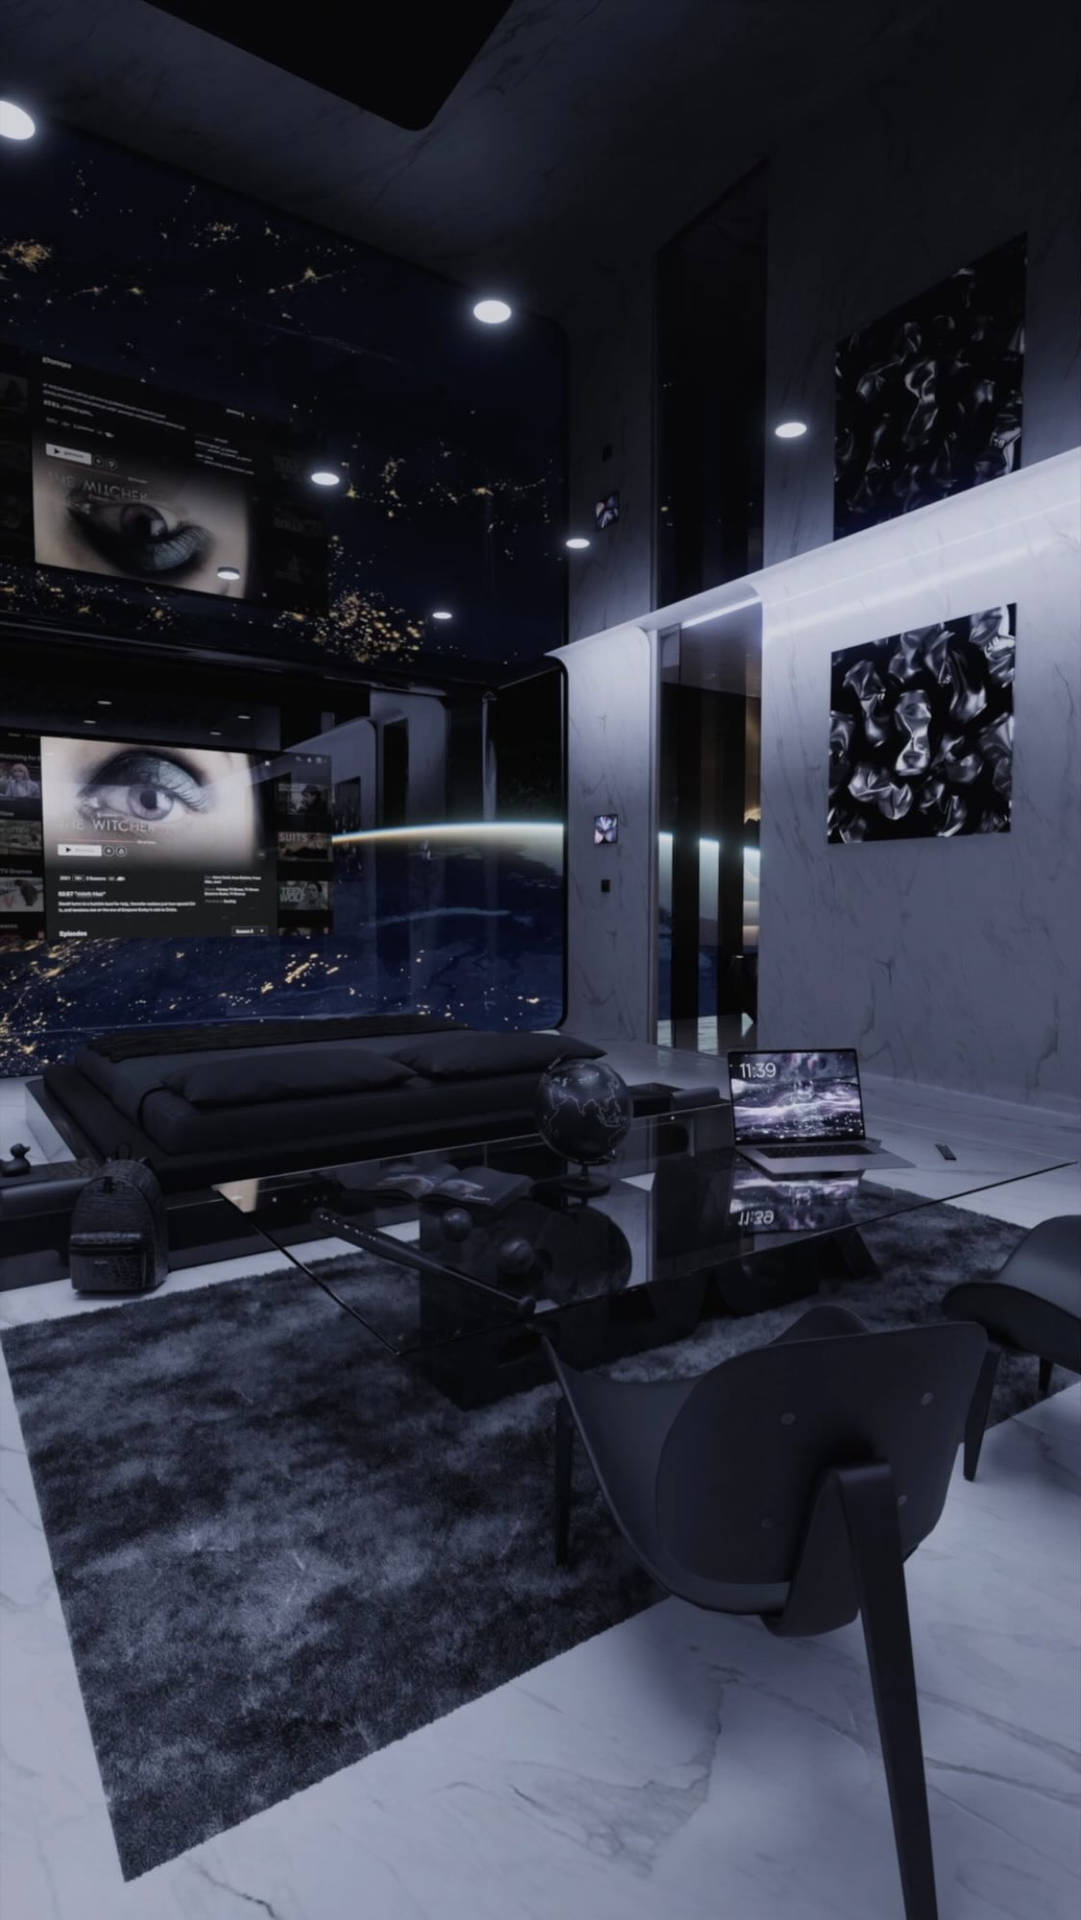 A Futuristic Living Room With A Black And White Theme Wallpaper